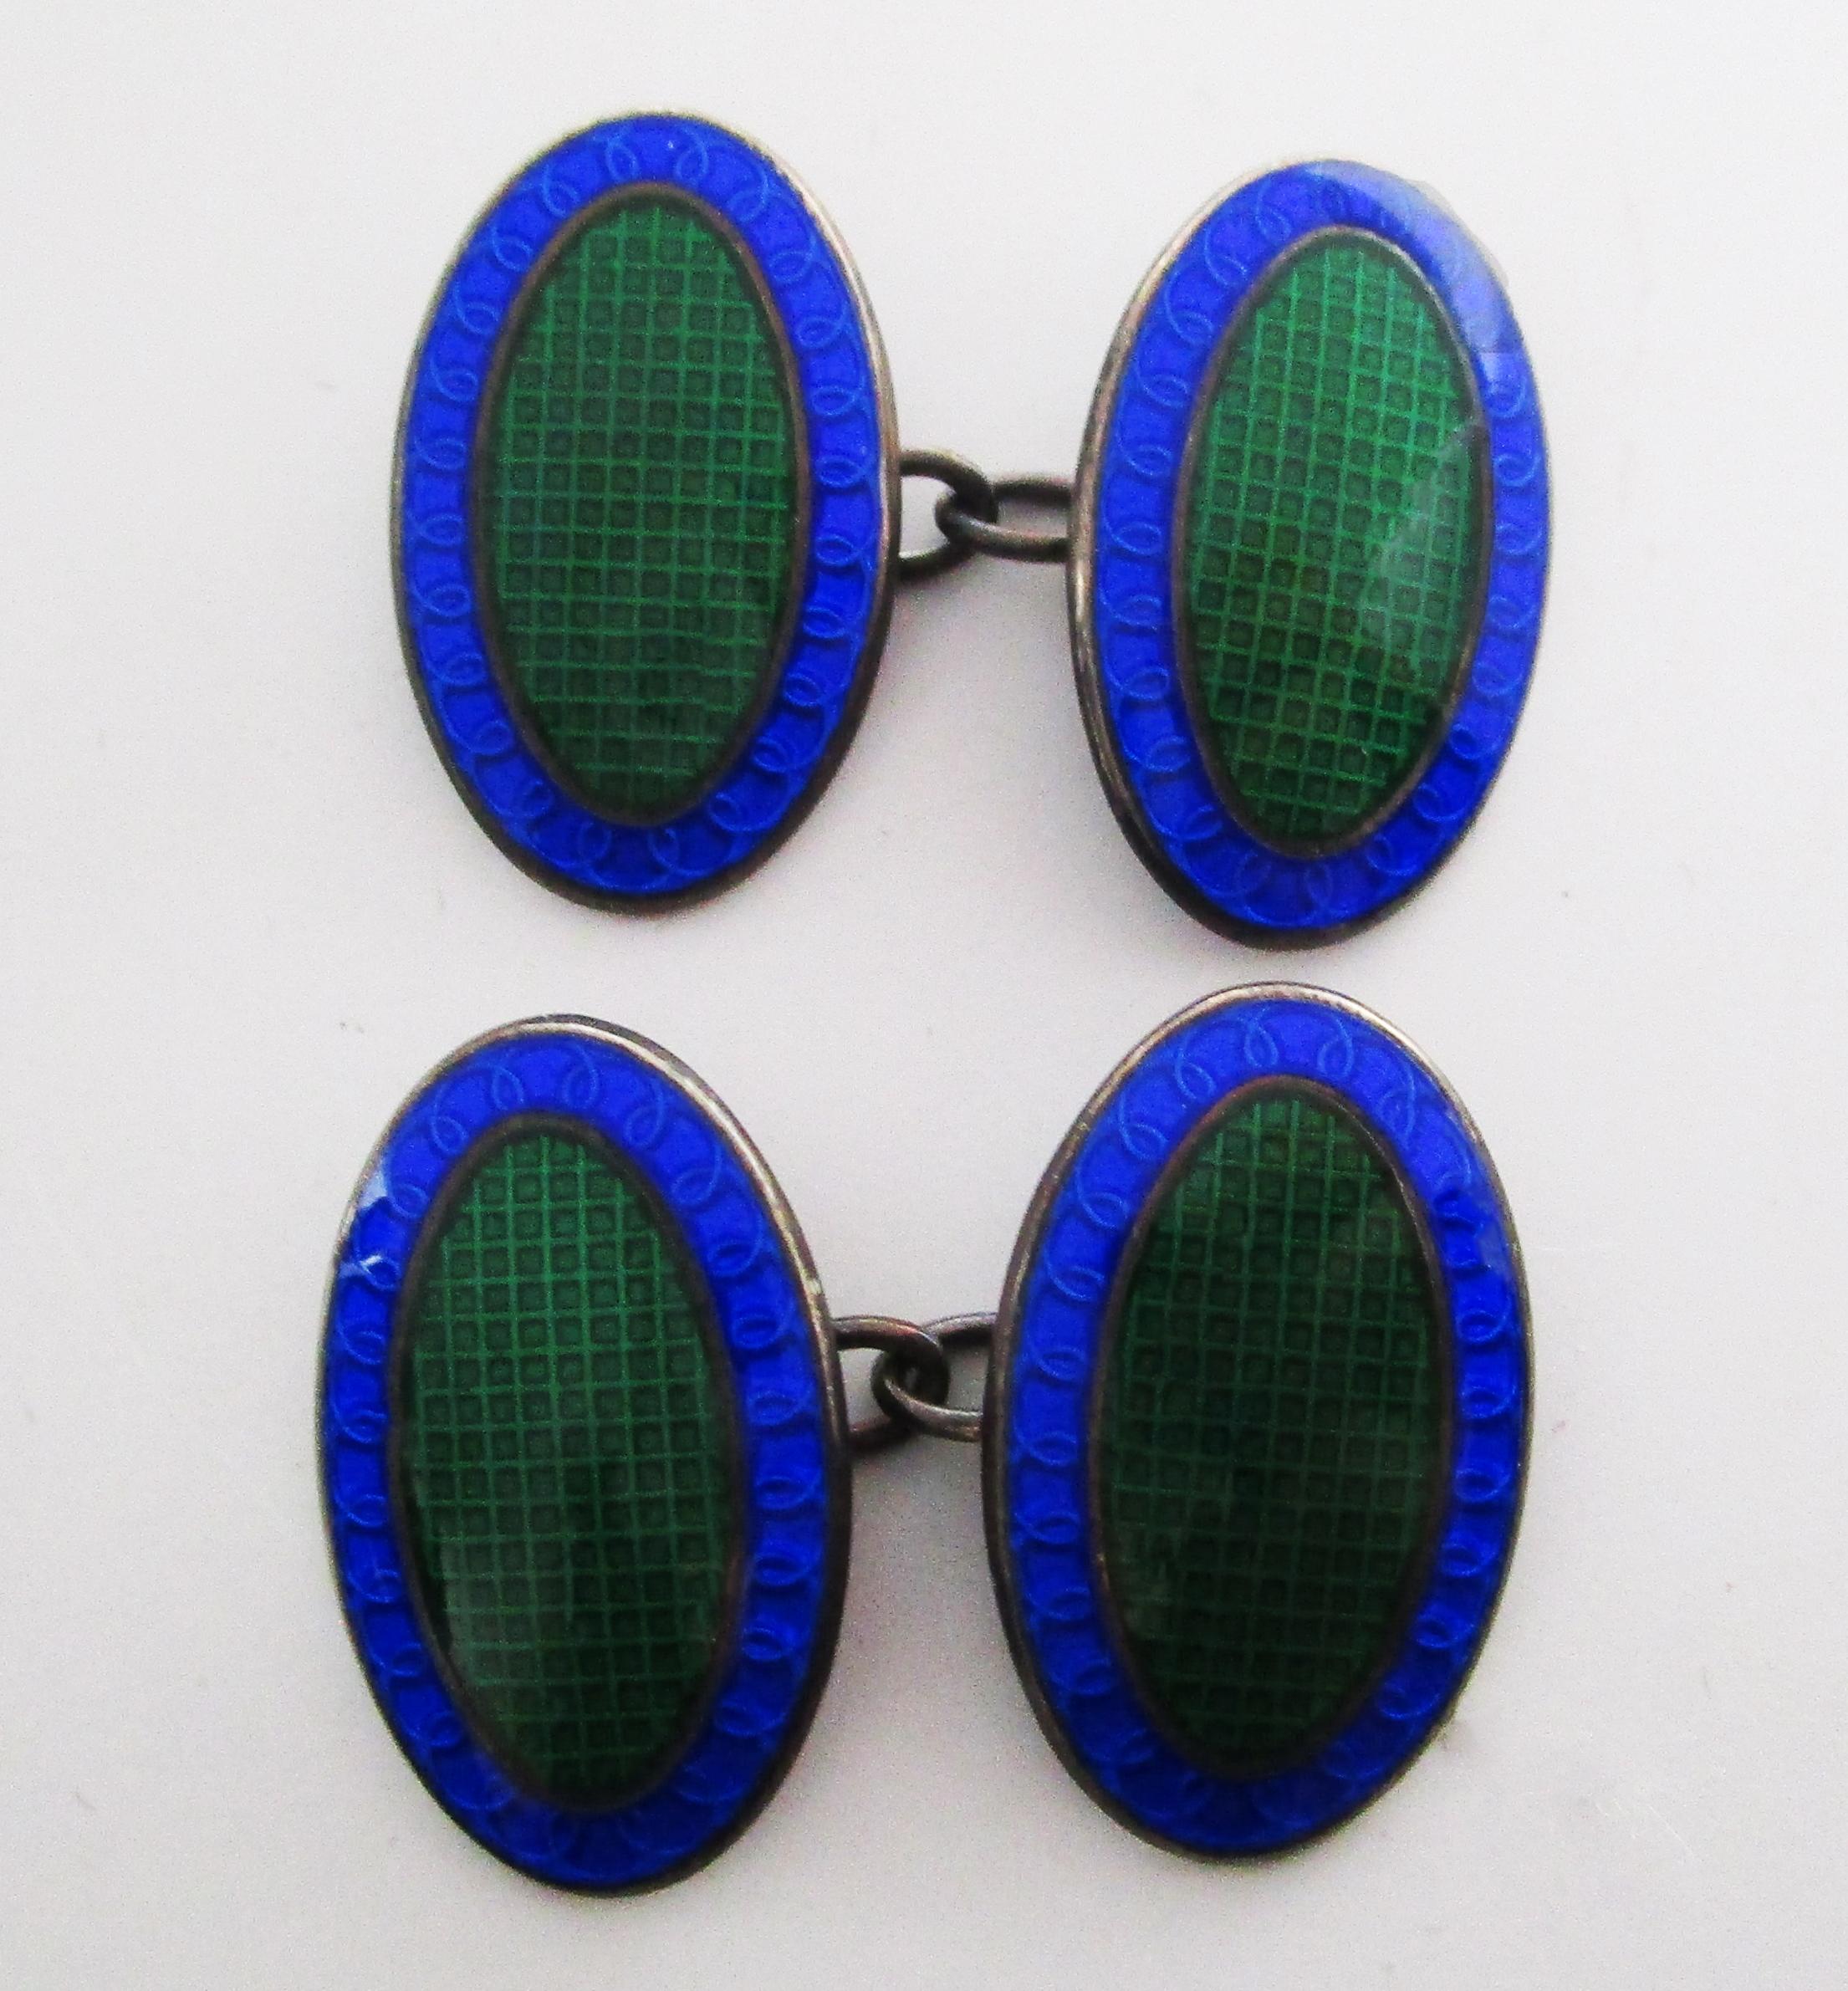 These are an excellent pair of cufflinks in sterling silver and enamel with a striking green and blue color scheme and a subtle grid pattern guilloche field. The bright colors of the enamel make these links particularly noticeable. The subtle grid